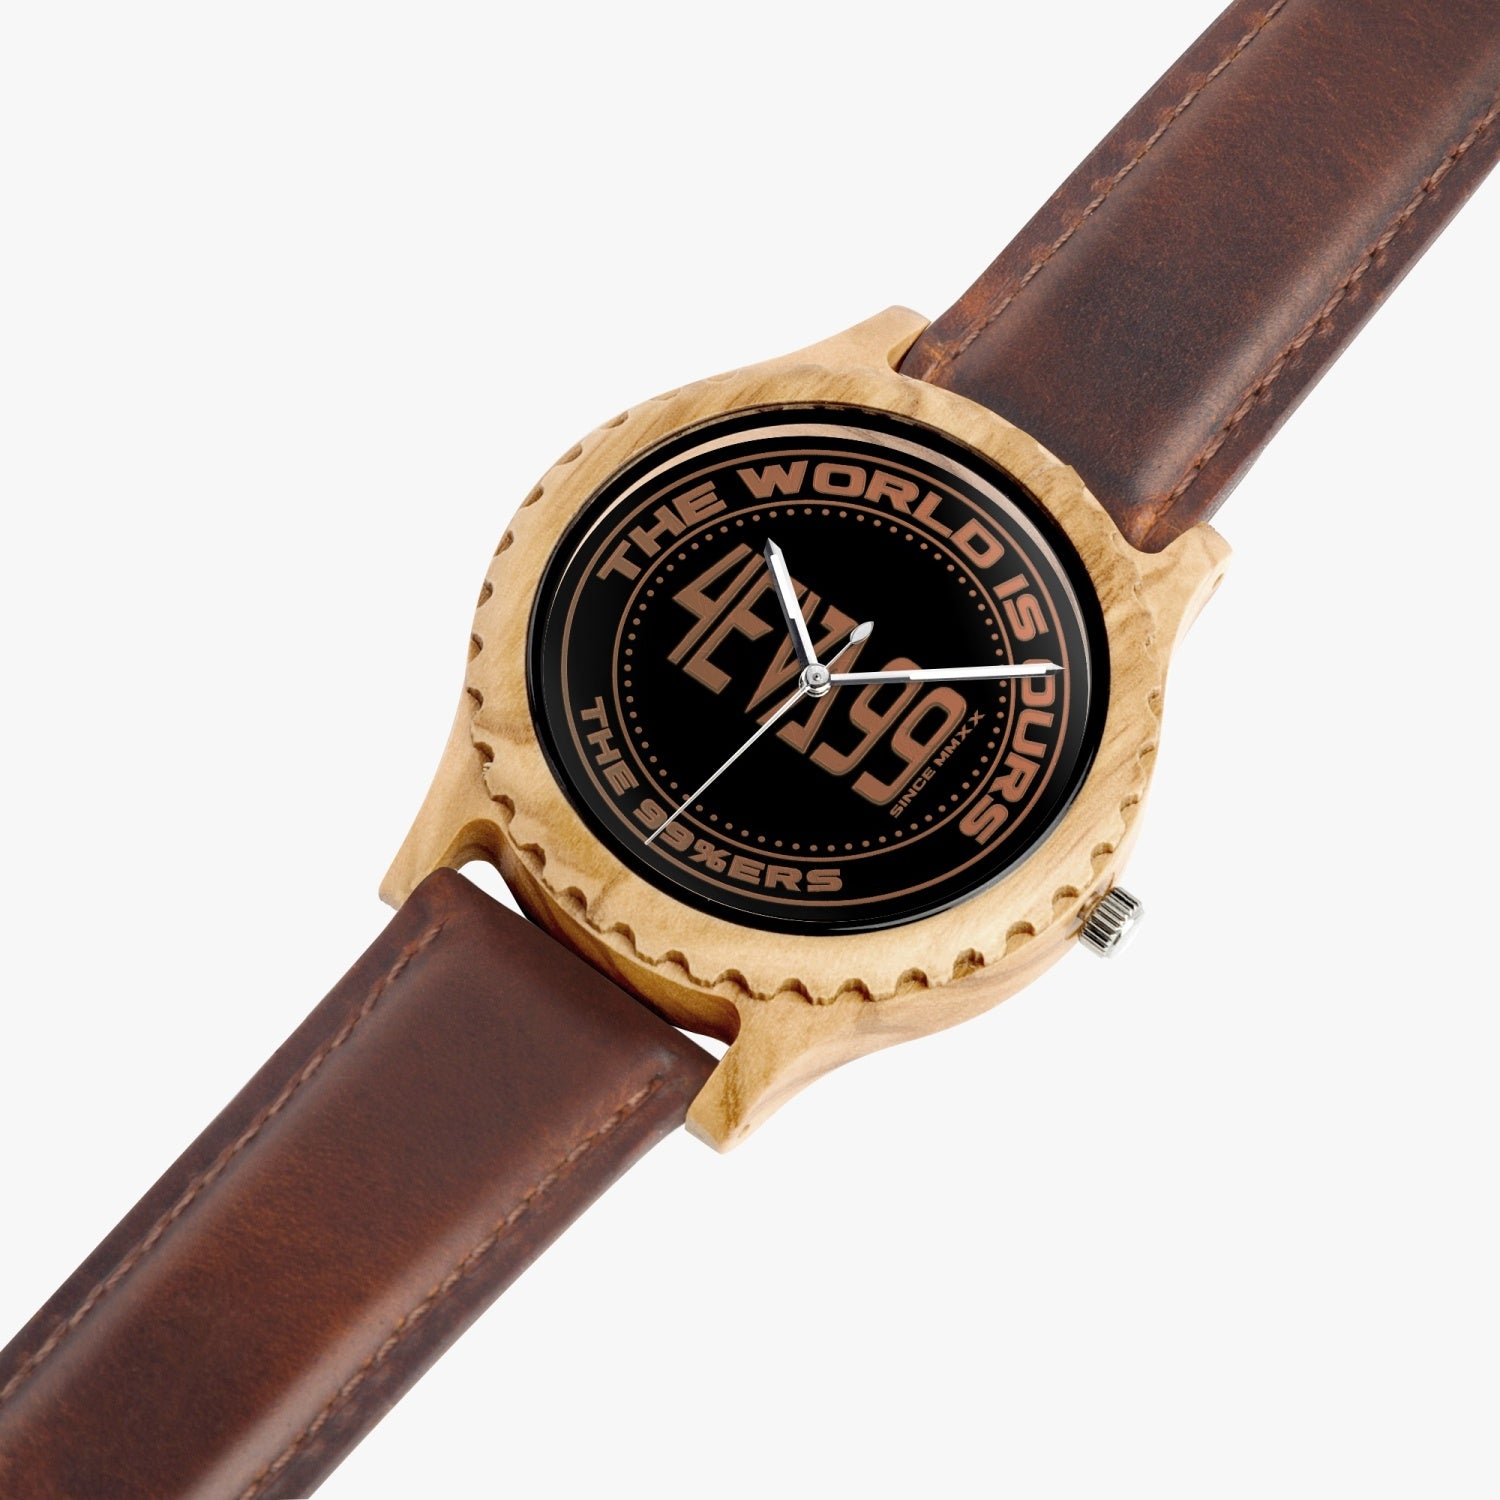 EMBLEM 205. Italian Olive Lumber Wooden Watch - Leather Strap